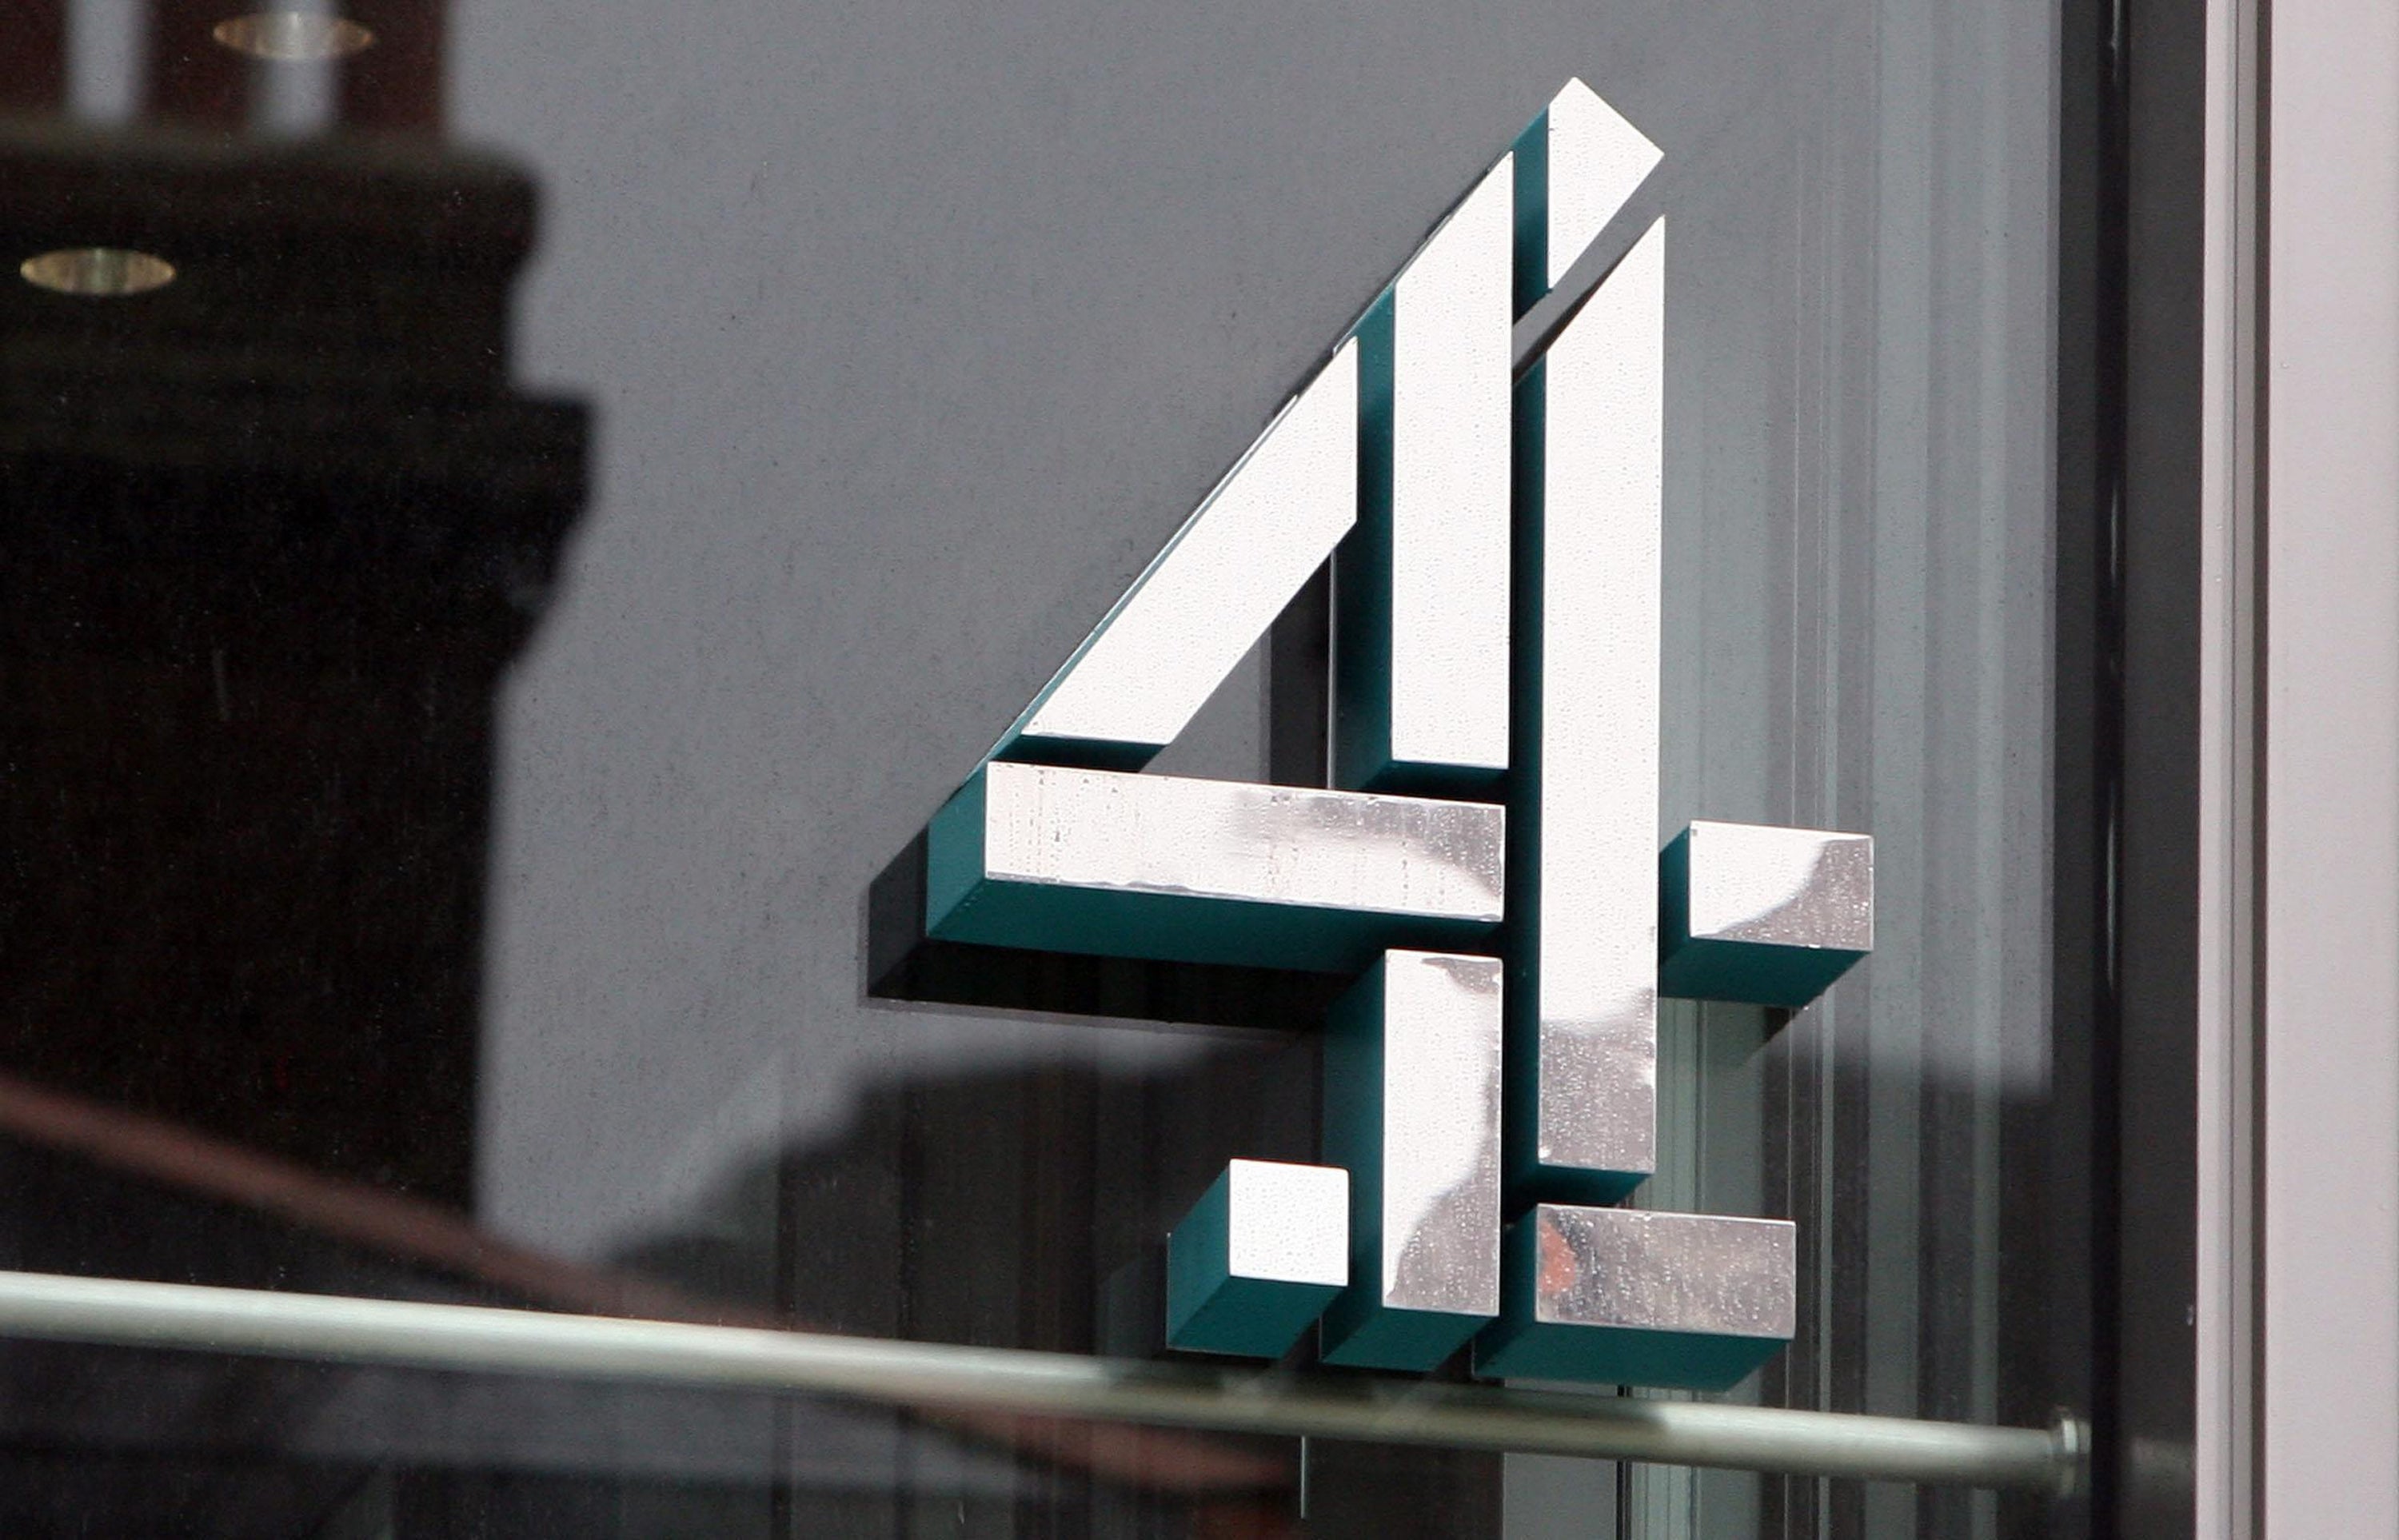 Ian Murray is set to discuss the importance of Channel 4 for Scotland’s creative industry (Lewis Whyld/PA)